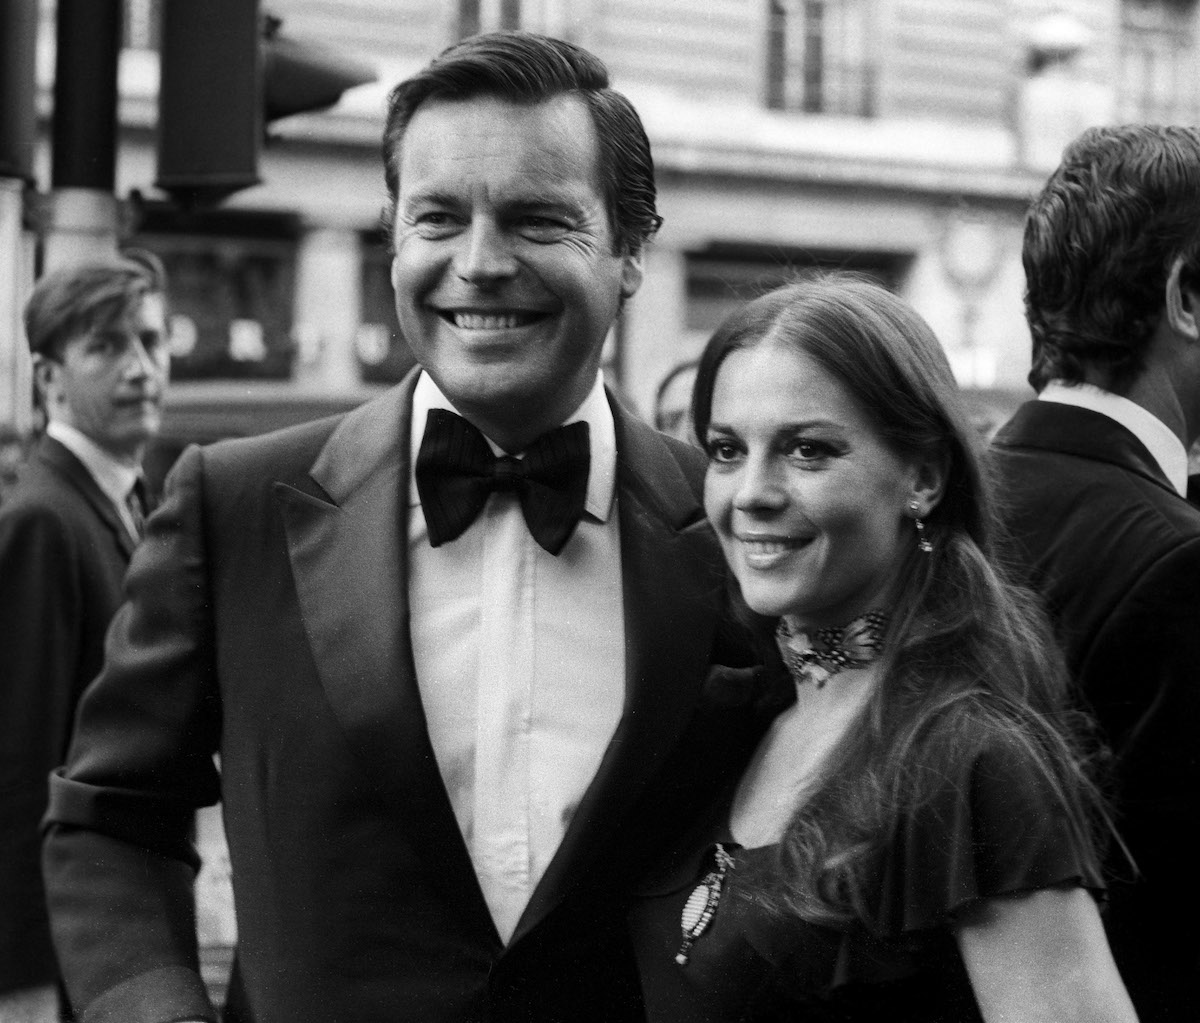 Actors Robert Wagner and Natalie Wood at the premiere of The Godfather in 1972